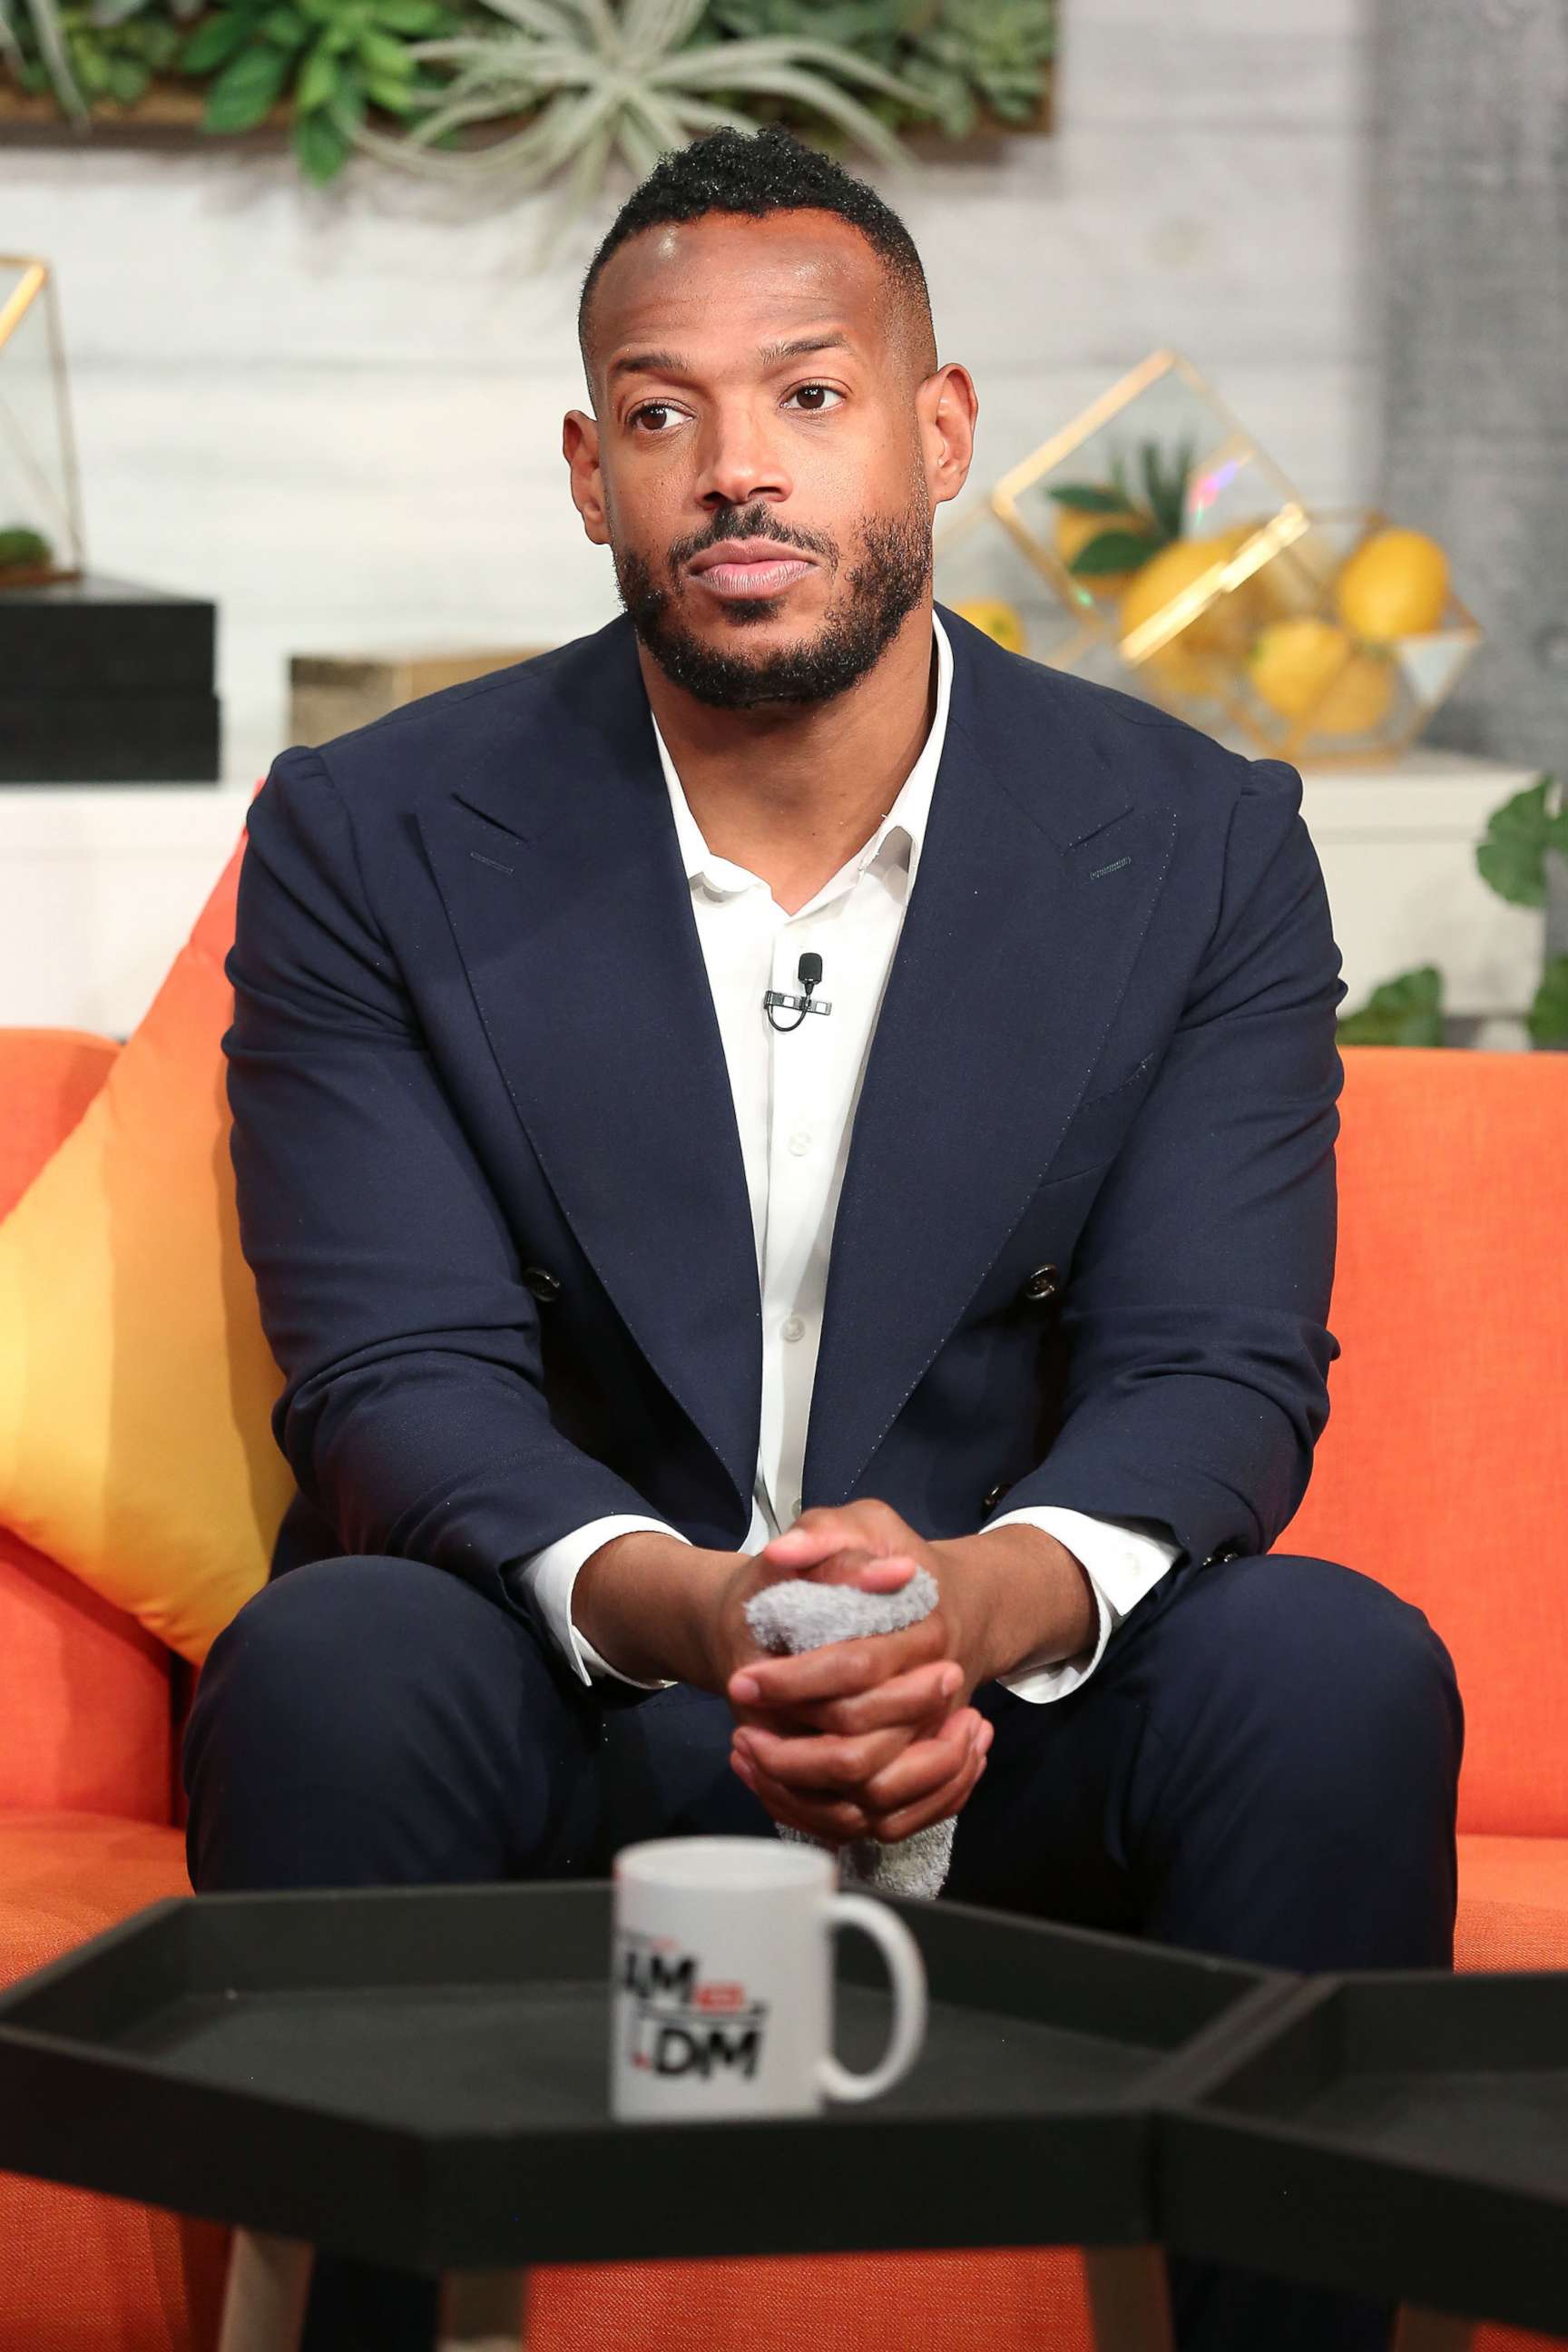 PHOTO: In this Aug. 15, 2019, file photo, Marlon Wayans appears on BuzzFeed's "AM to DM" show in New York.